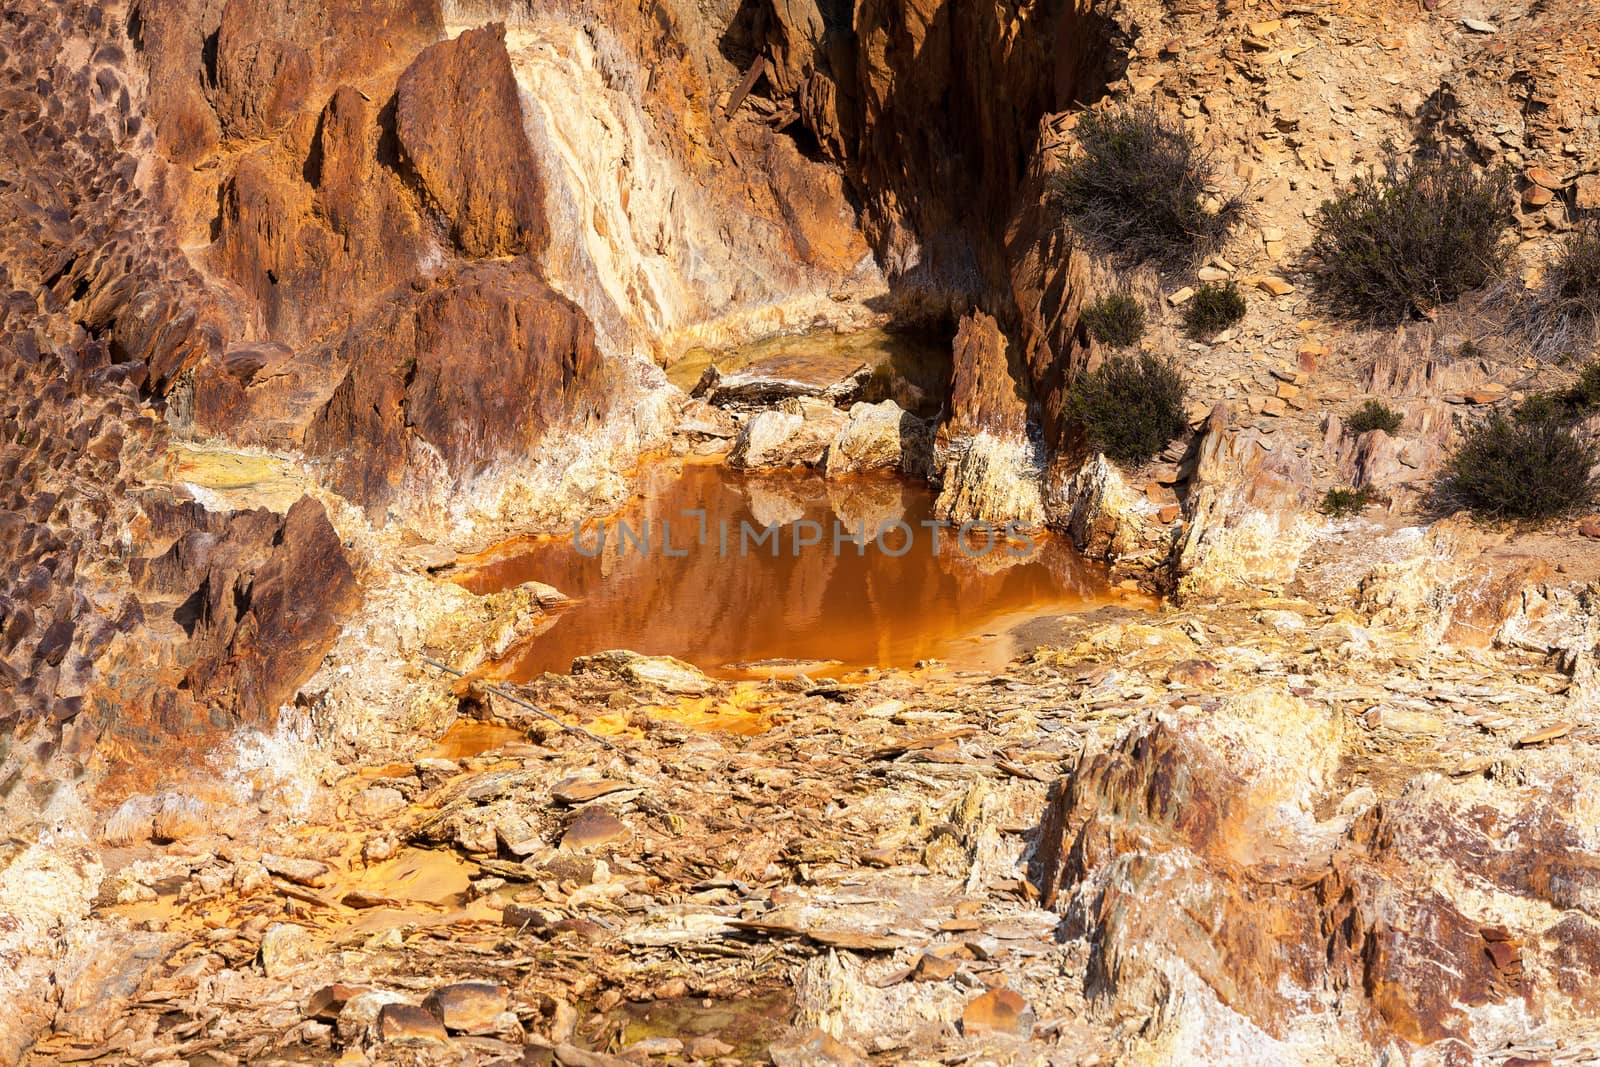 Puddle in the rocky ravine by Discovod